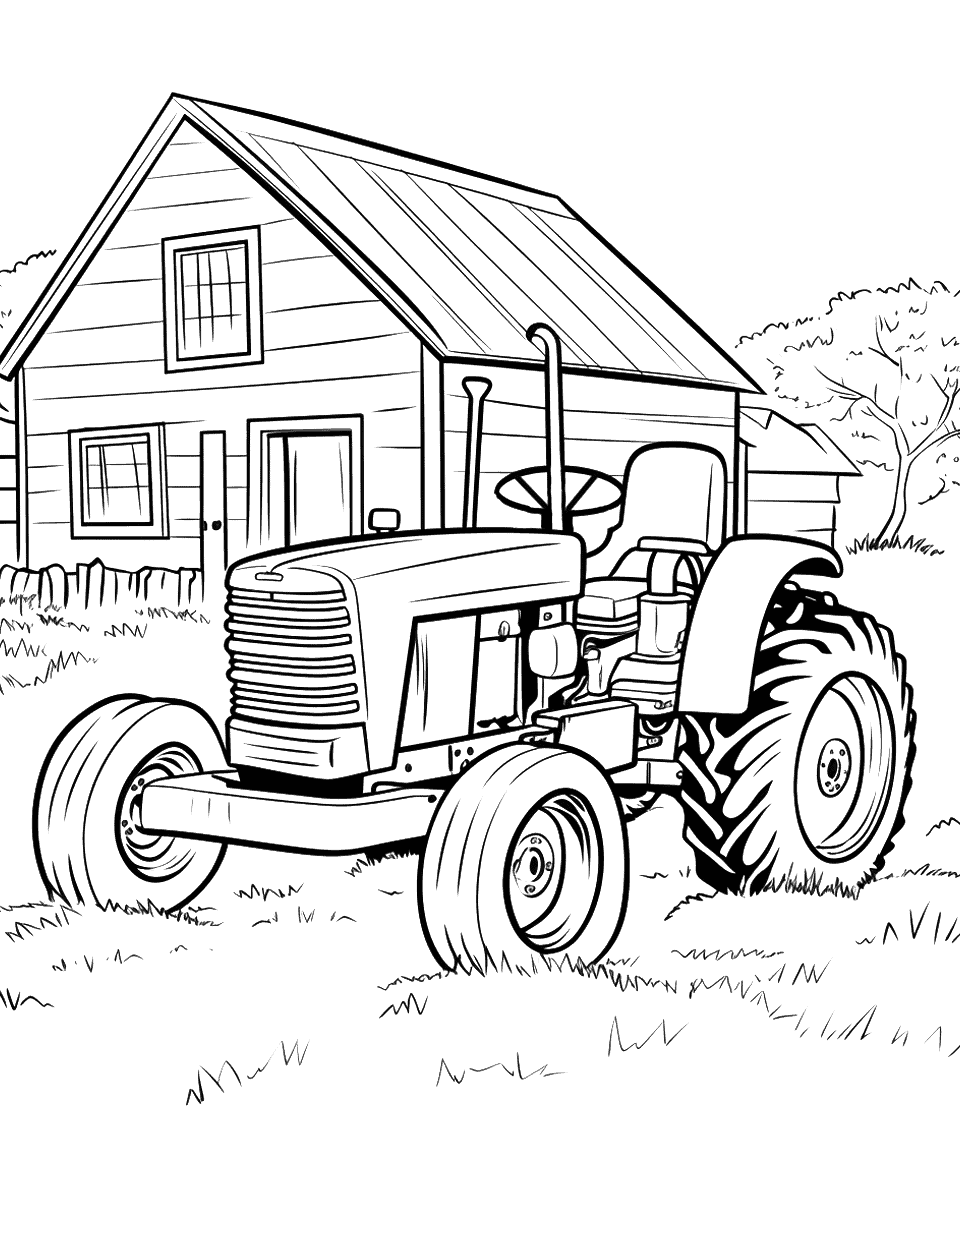 Tractor Near the Barn Coloring Page - A tractor parked beside a traditional wooden barn.